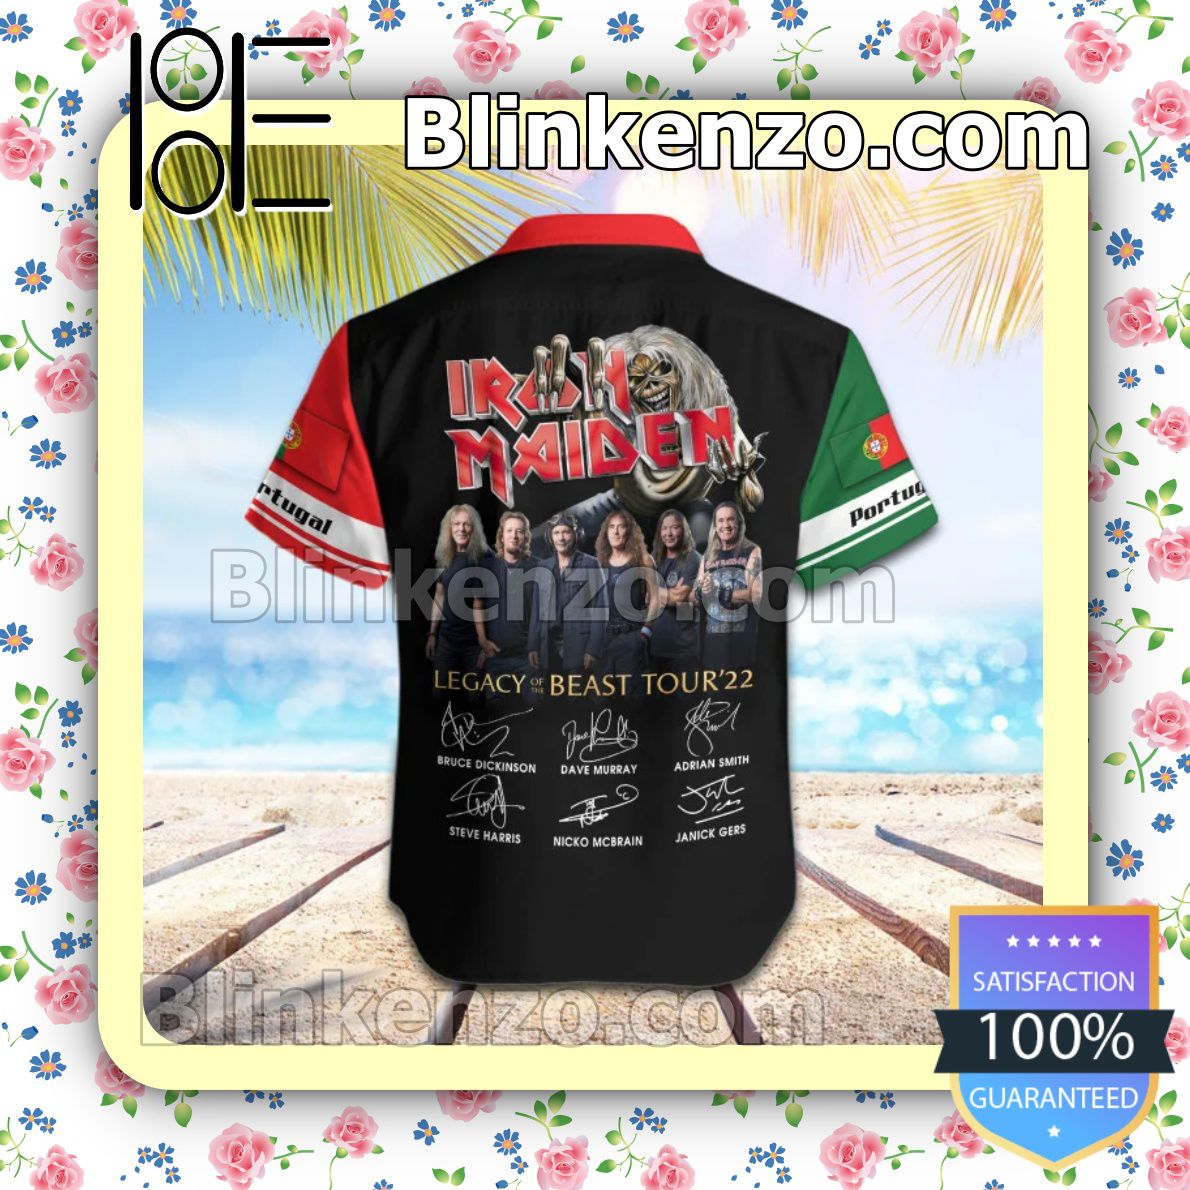 Sale Off Iron Maiden Portugal Legacy of the Beast World Tour 2022 Summer Beach Shirt